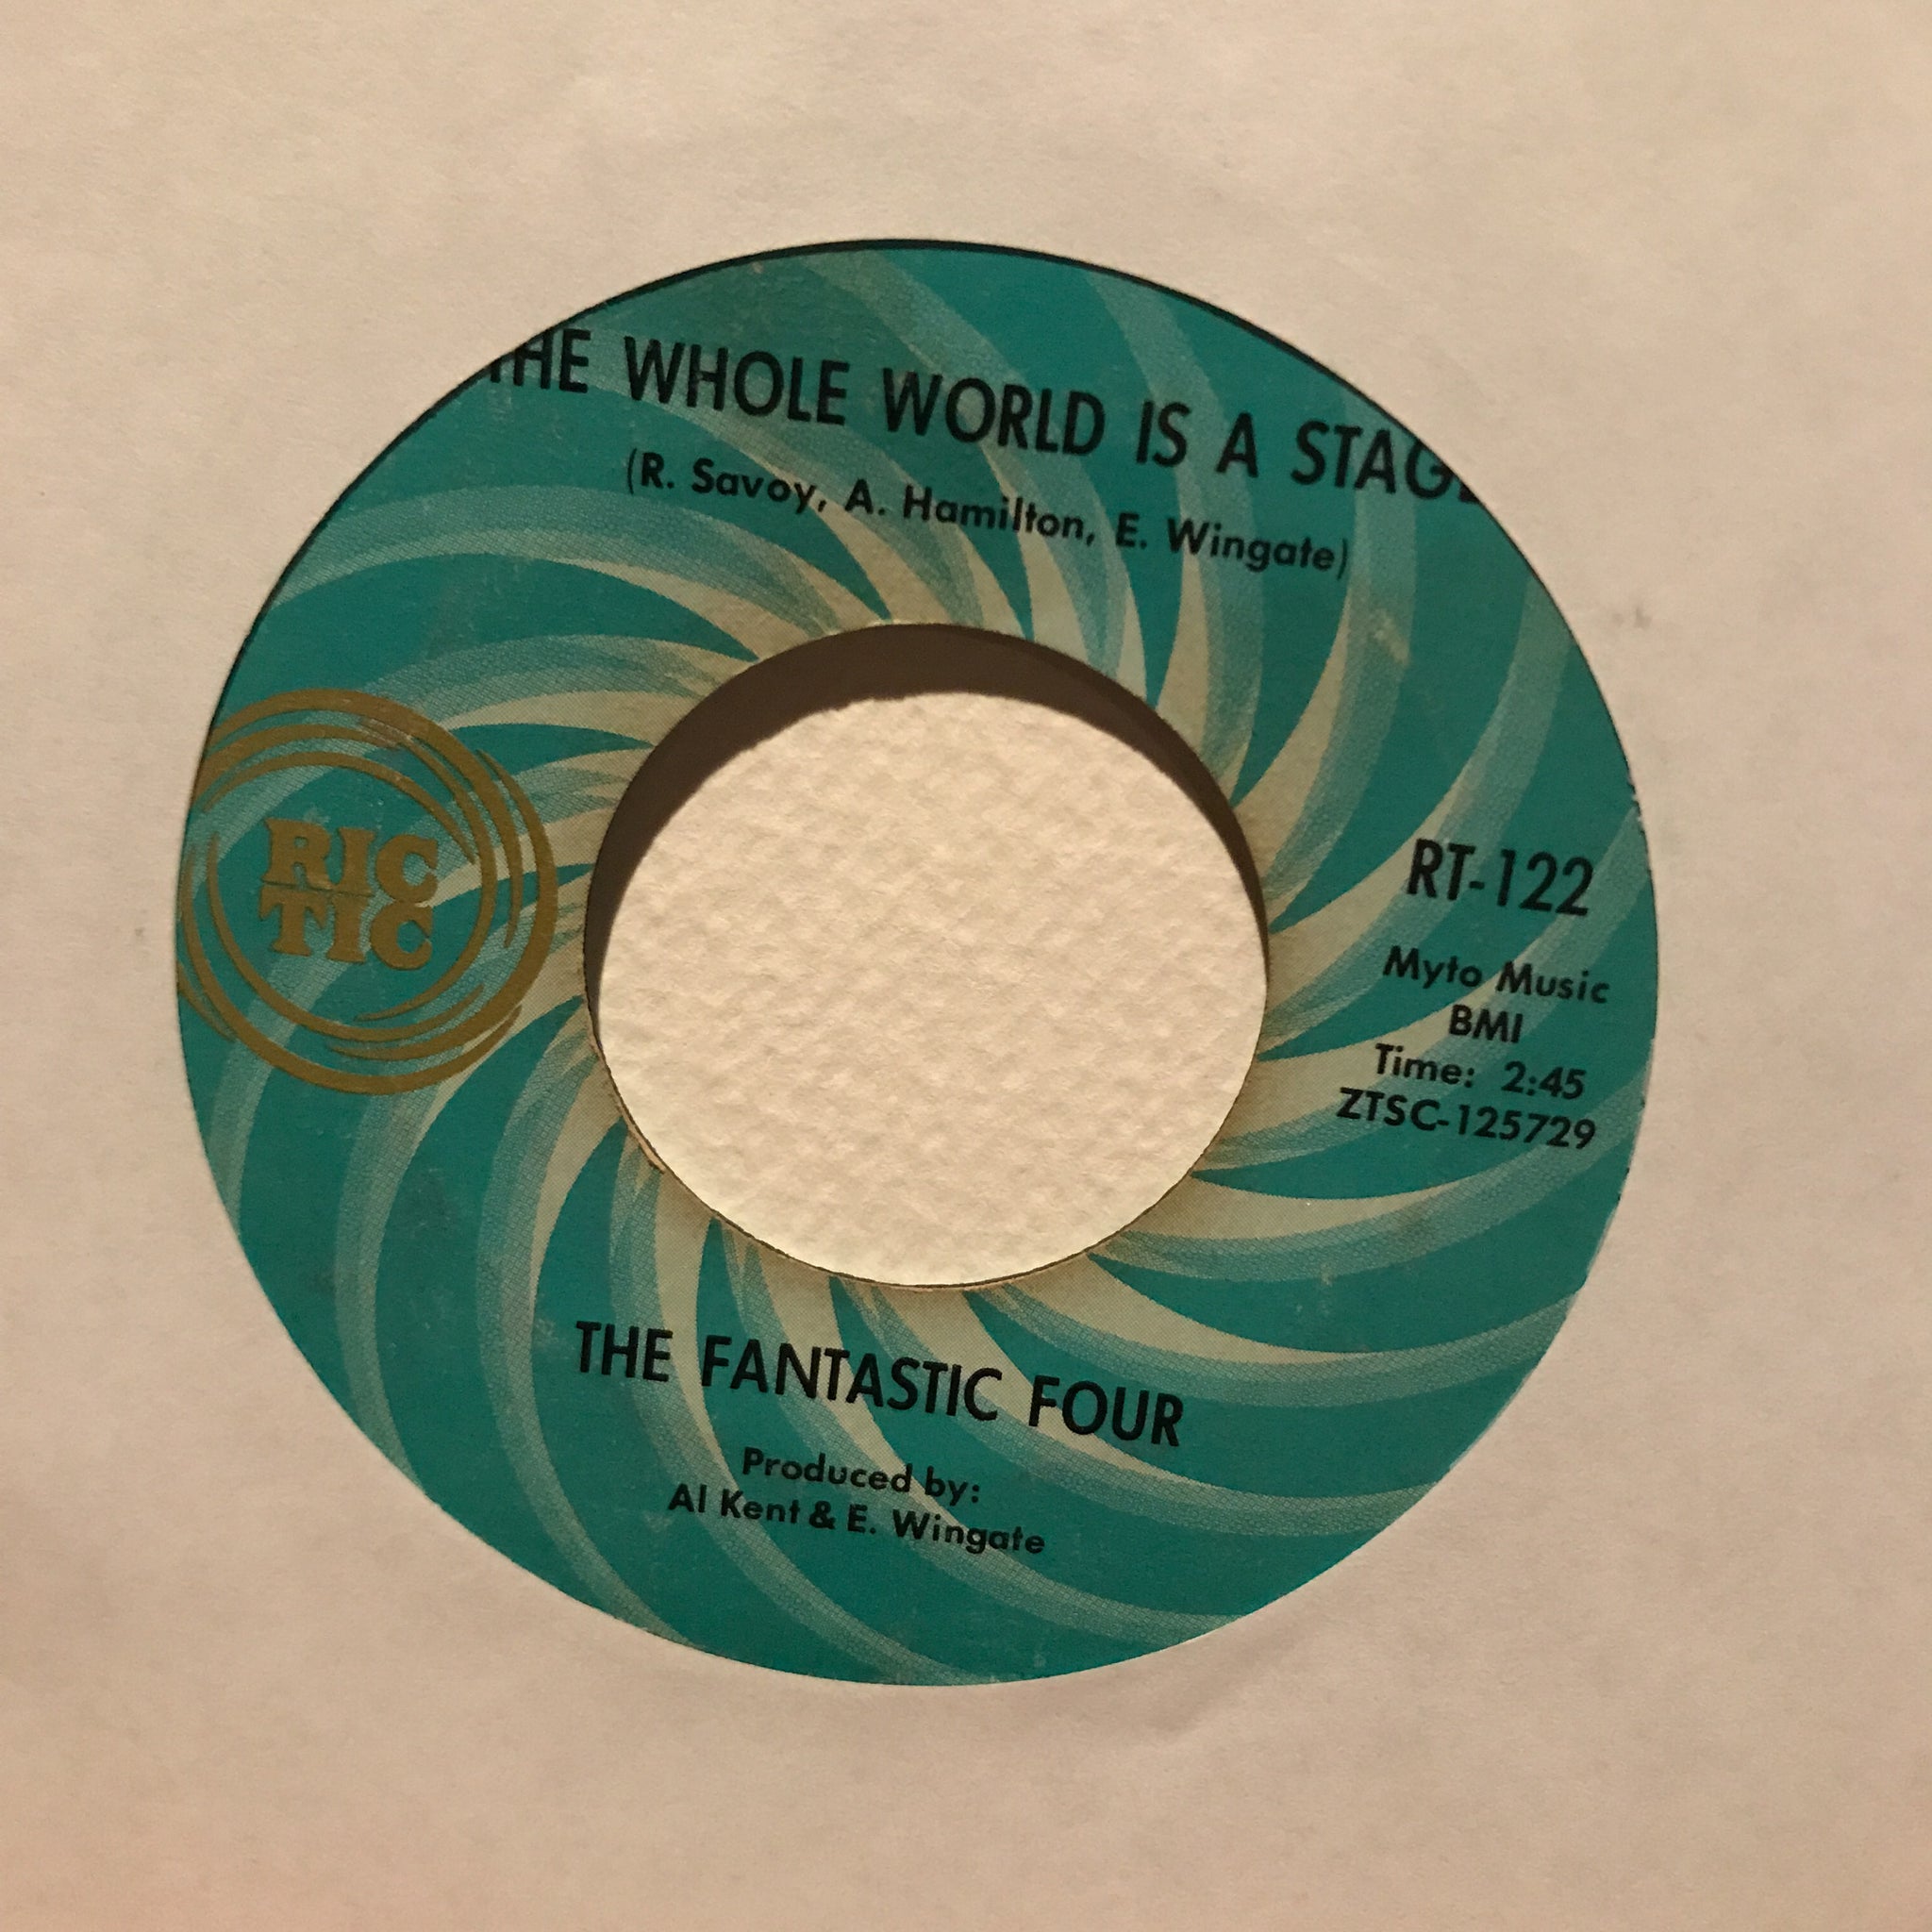 The Fantastic Four ‎– The Whole World Is A Stage / Ain't Love Wonderful